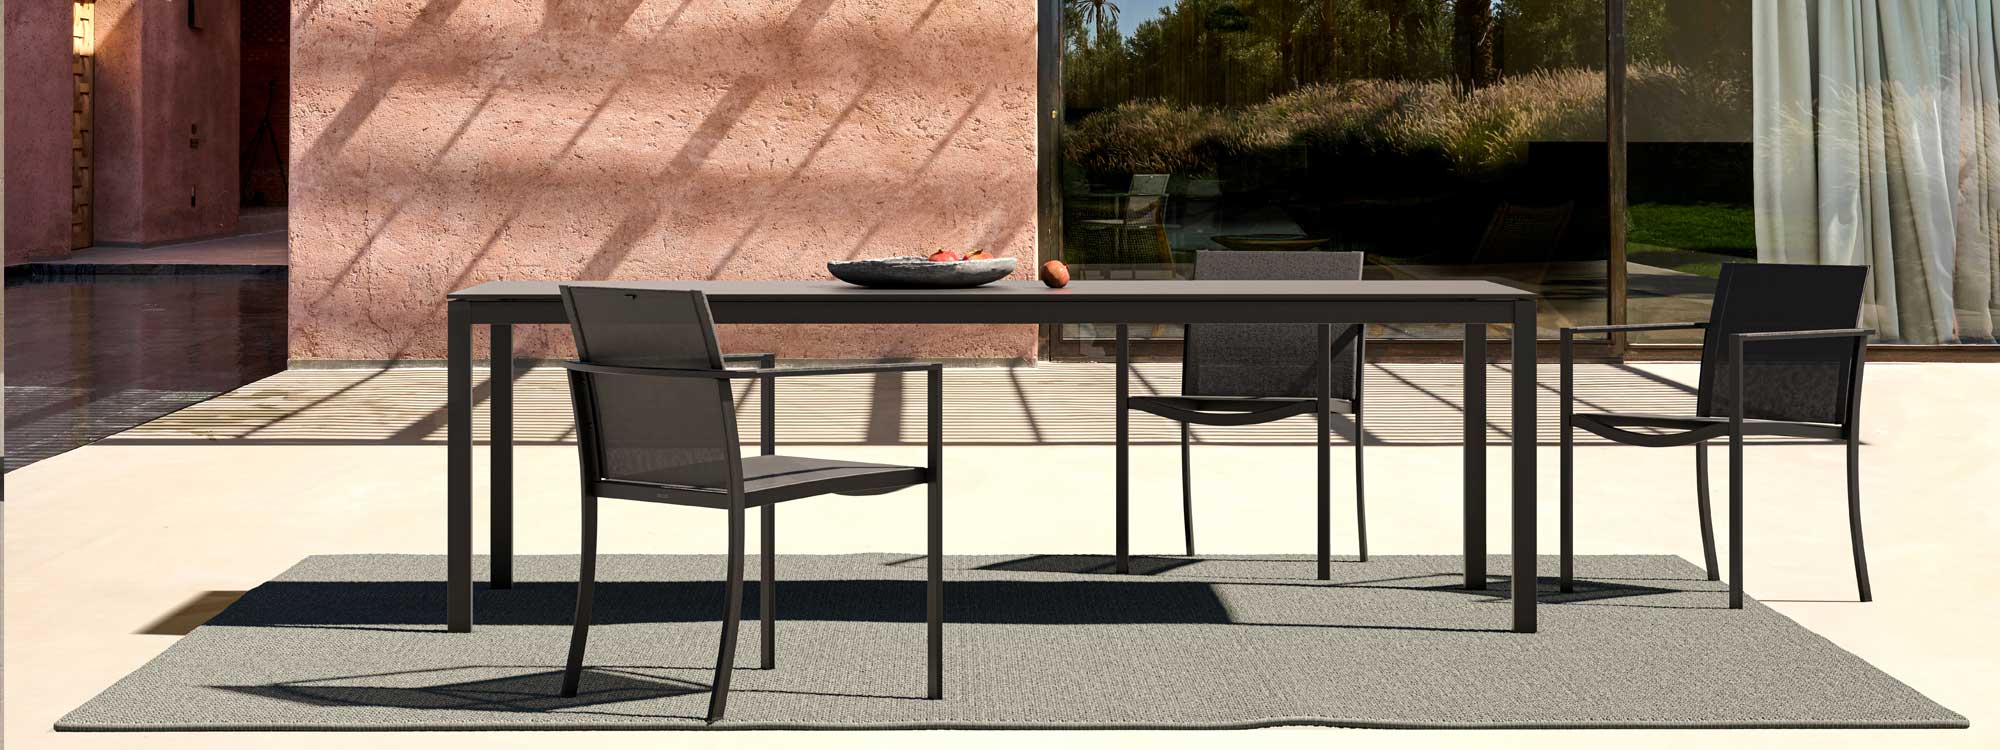 Image of black Ozon garden chairs and Taboela dining table by Royal Botania